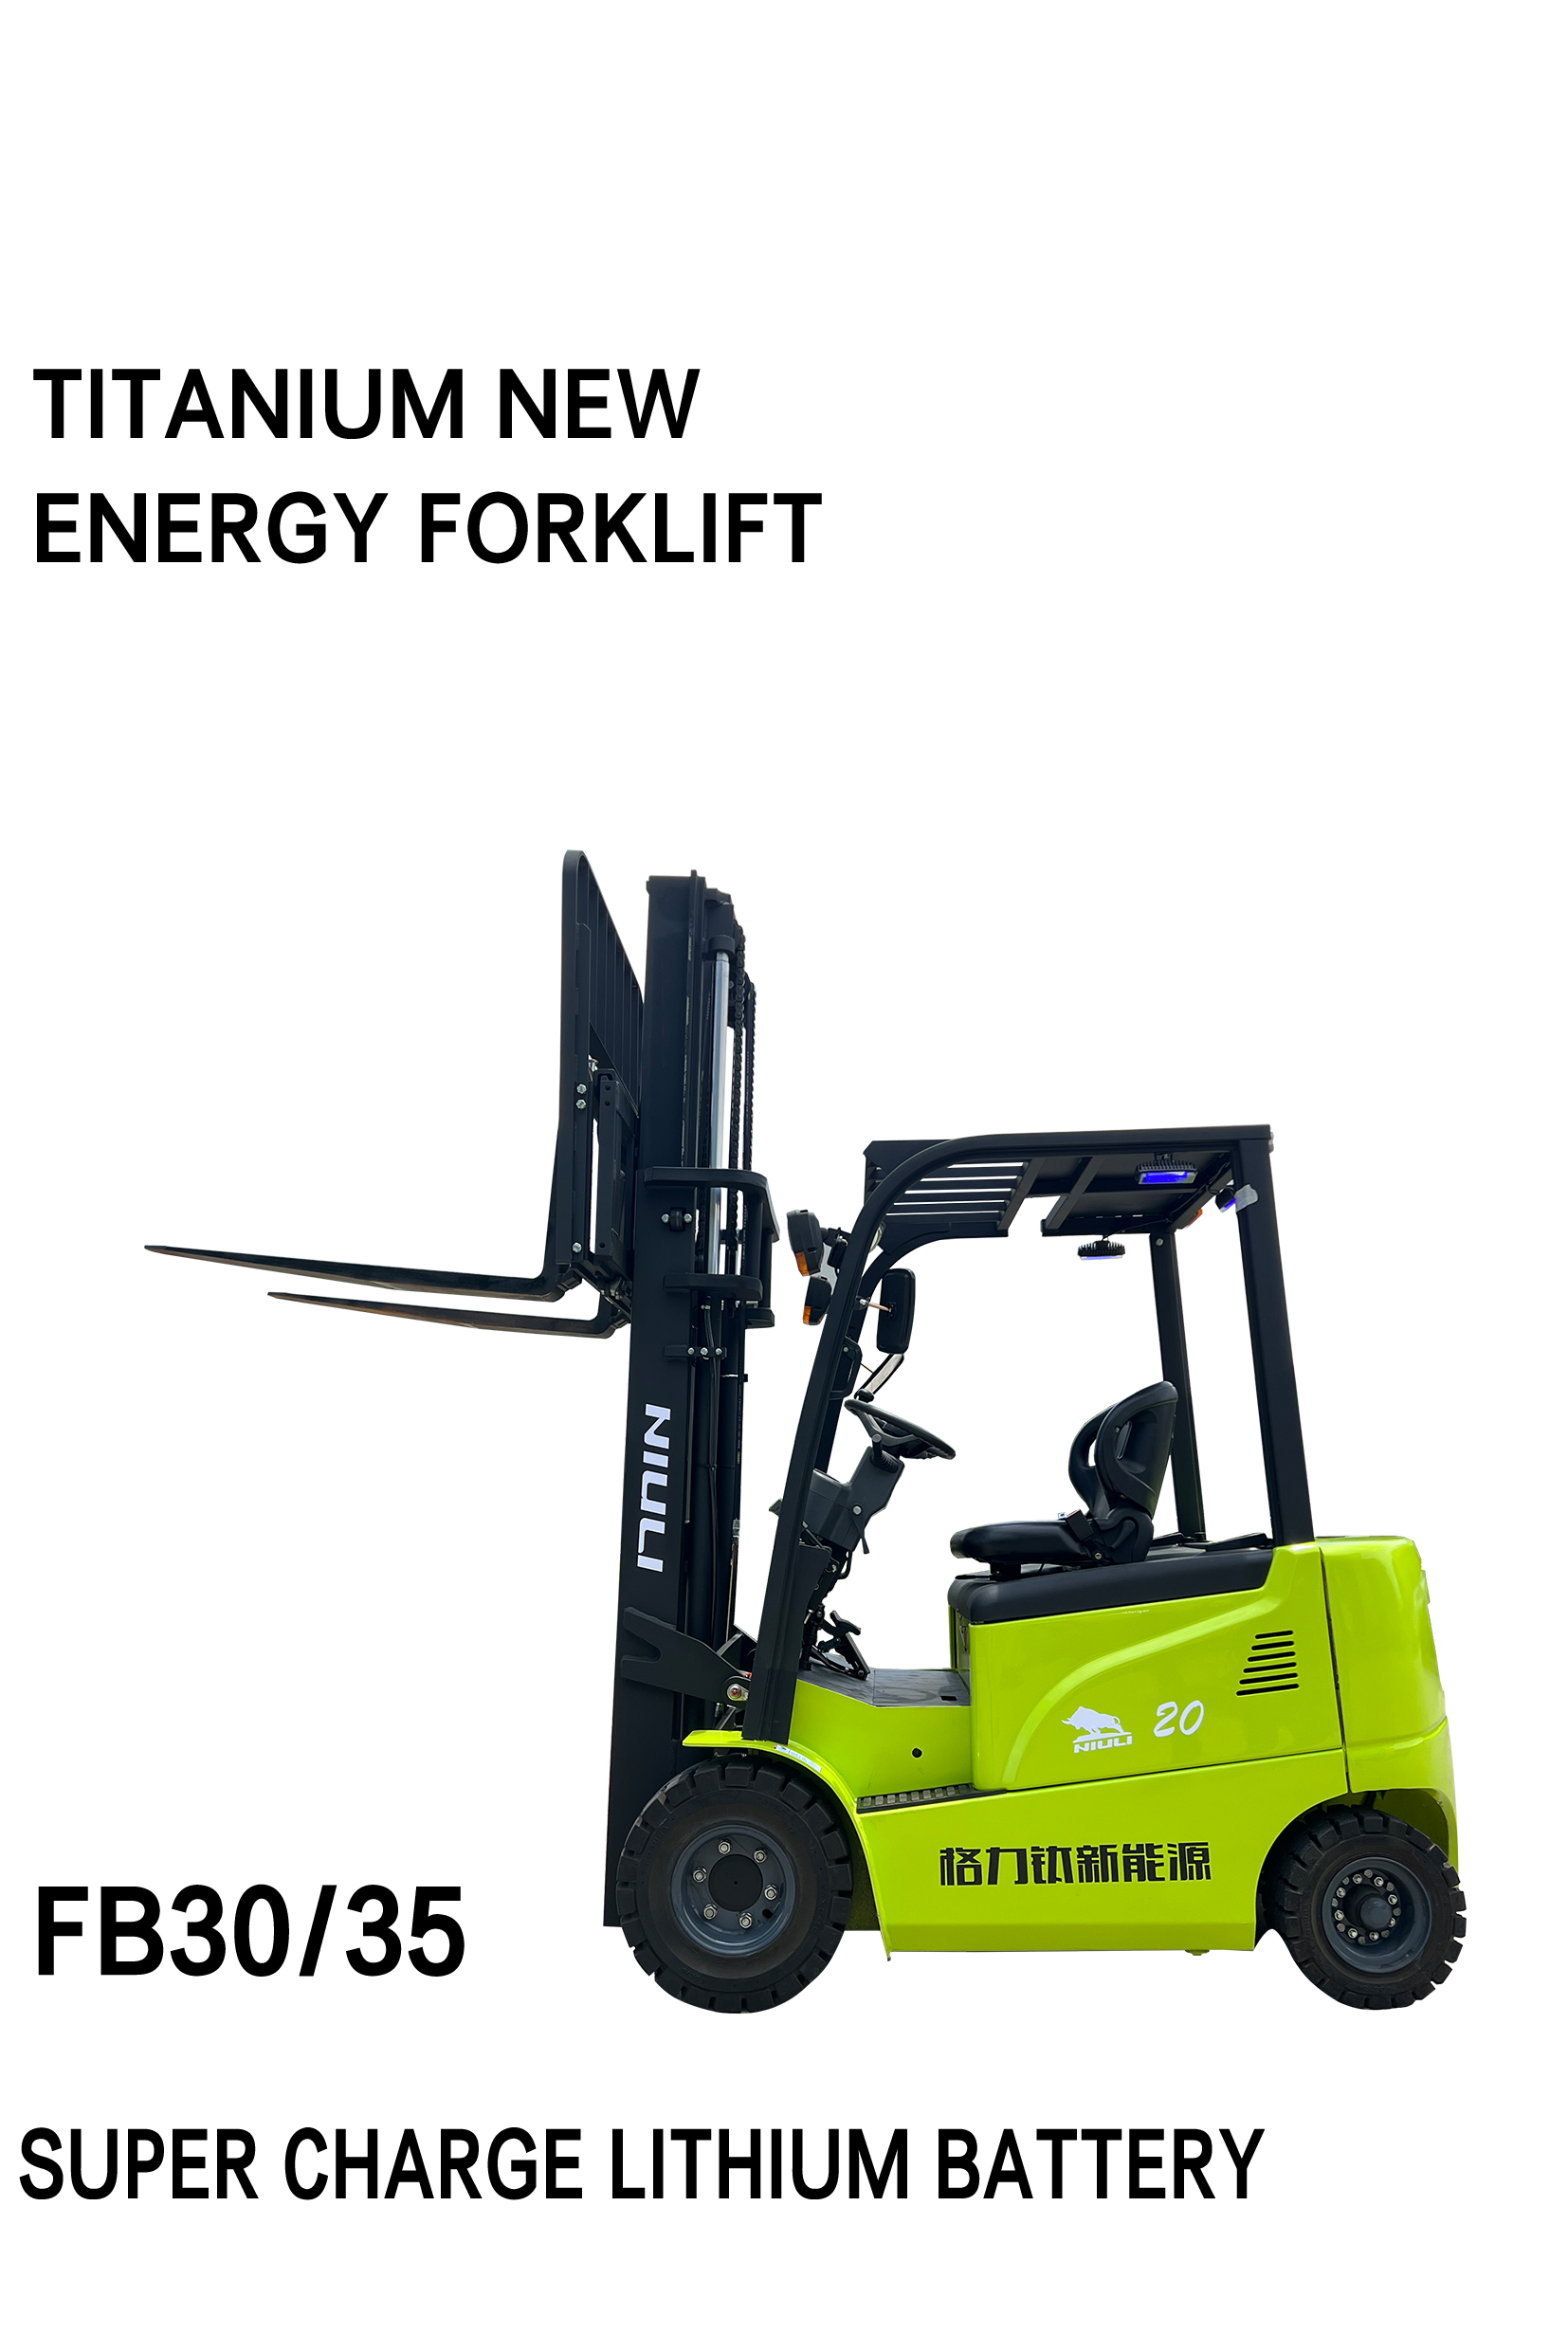 The Benefits of an Electric/Battery/Diesel Forklift